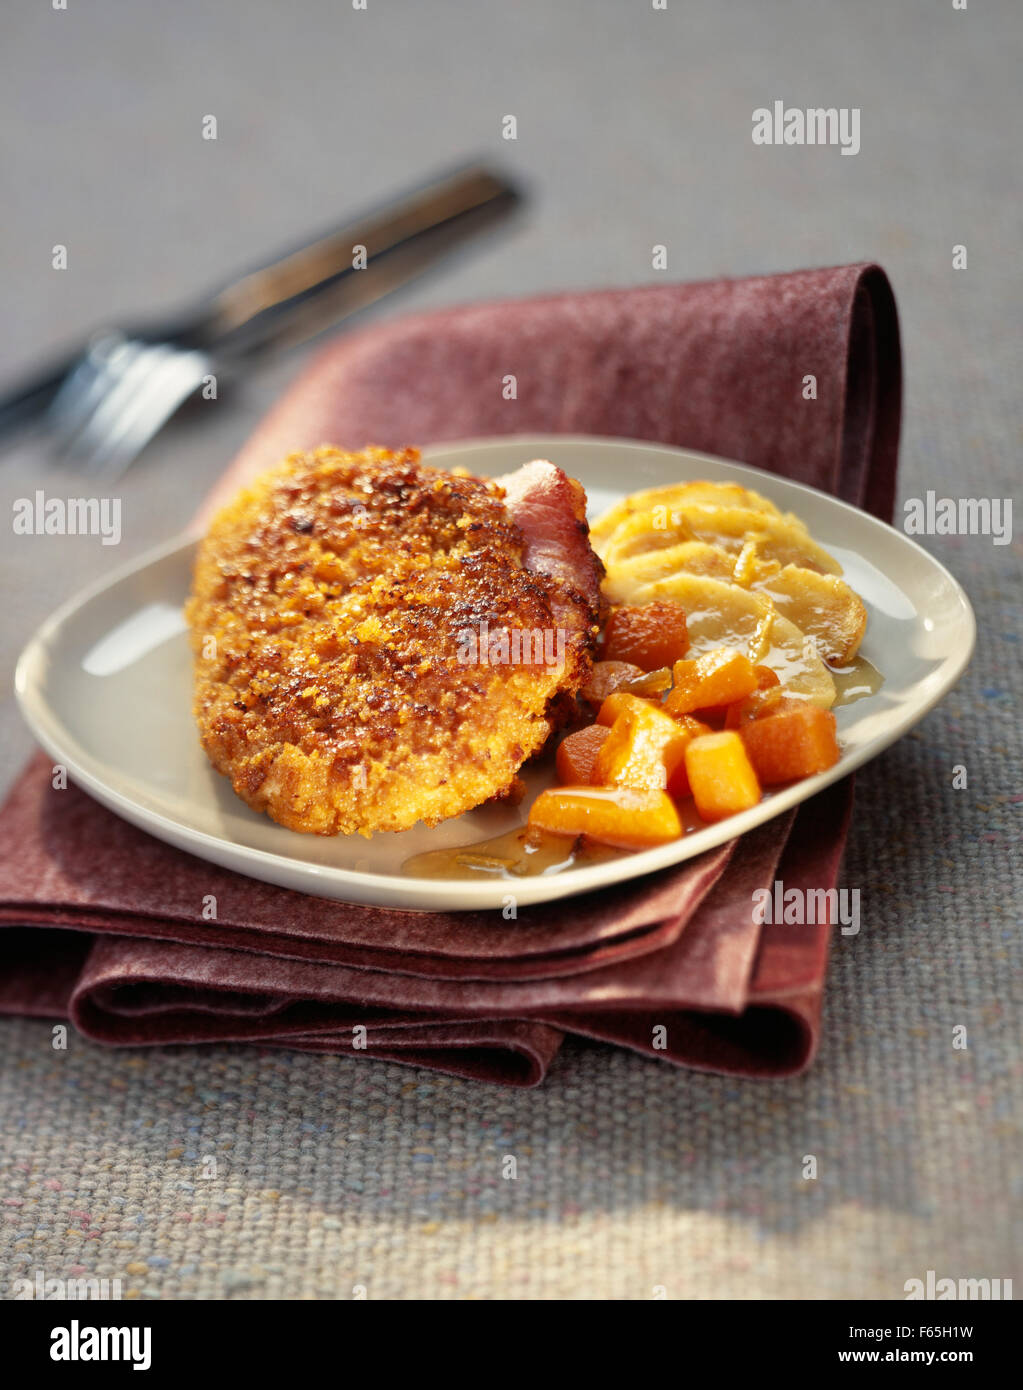 Chicken escalope with parmesan and Ginger bread crust Stock Photo